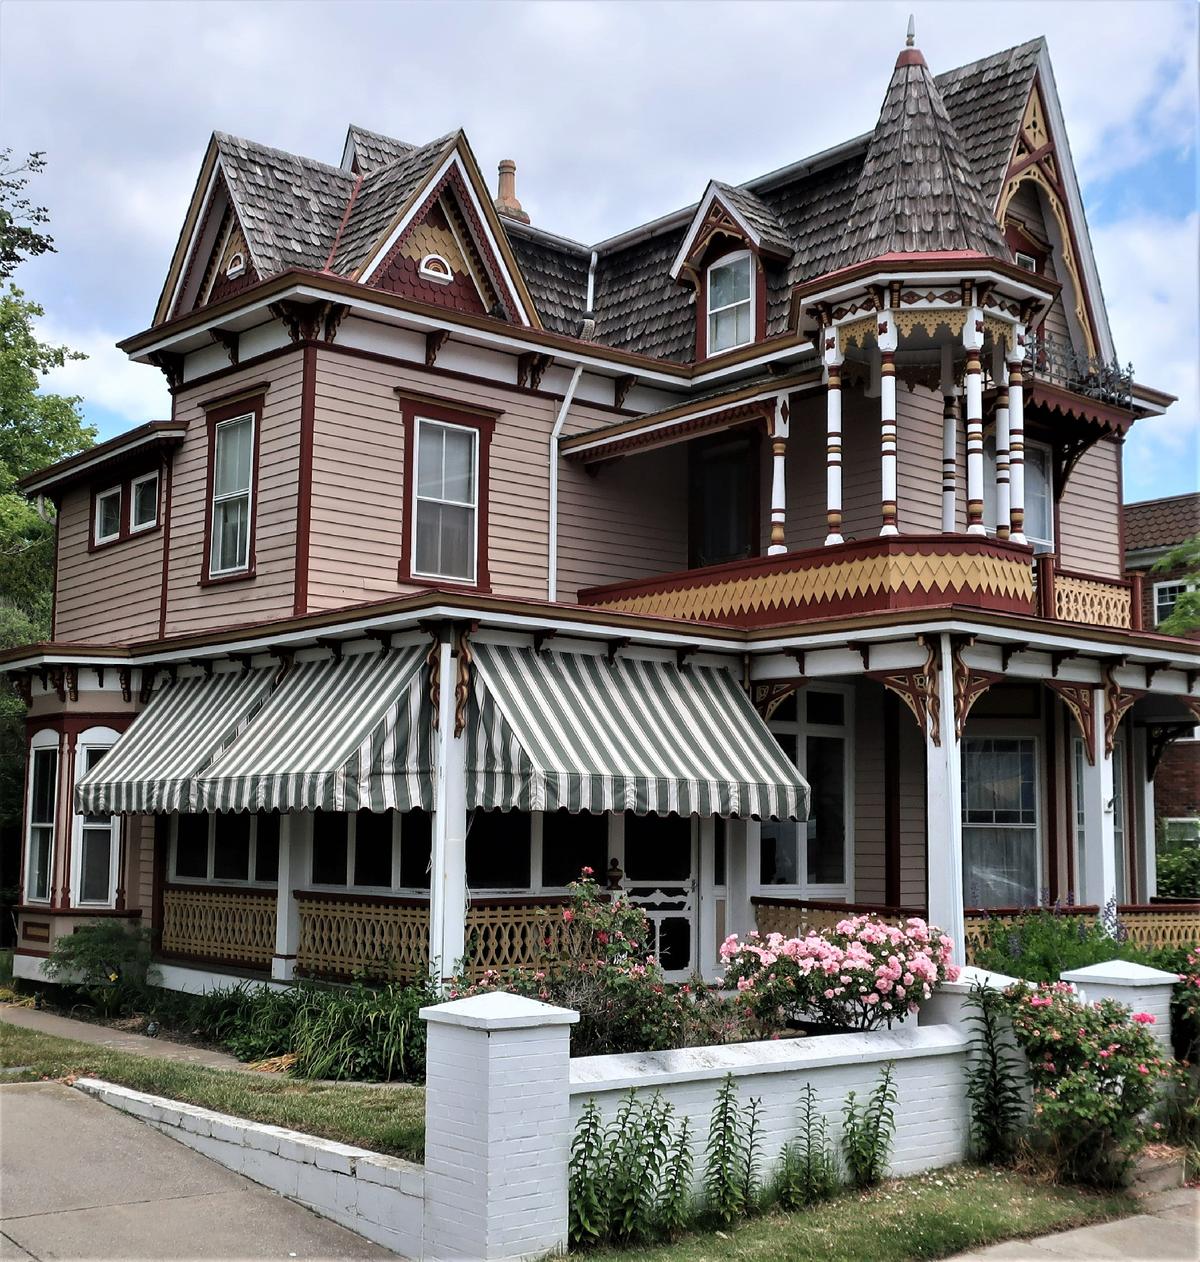 Victorian homes in Cape May, New Jersey, have helped the city reach National Historic Landmark status. (Photo courtesy of Victor Block)